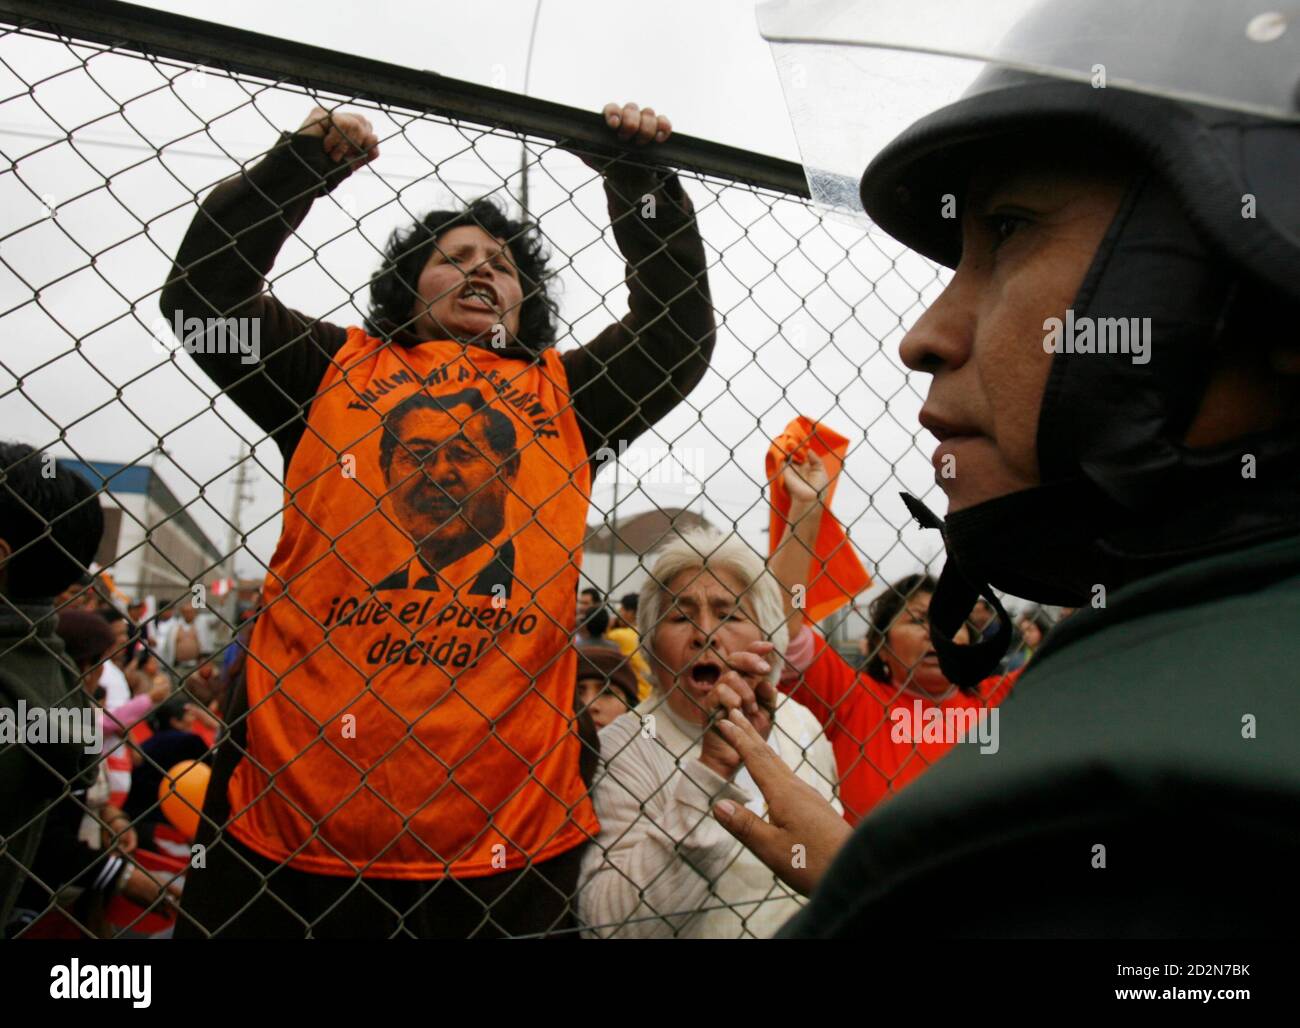 Supporters of Peru's former President Alberto Fujimori protest outside the airport, before his arrival to Peru, in Lima September 22, 2007. Fujimori was flown out of Chile on Saturday to face charges of human rights abuse and corruption seven years after fleeing Peru for Japan. REUTERS/Mariana Bazo(PERU) Stock Photo